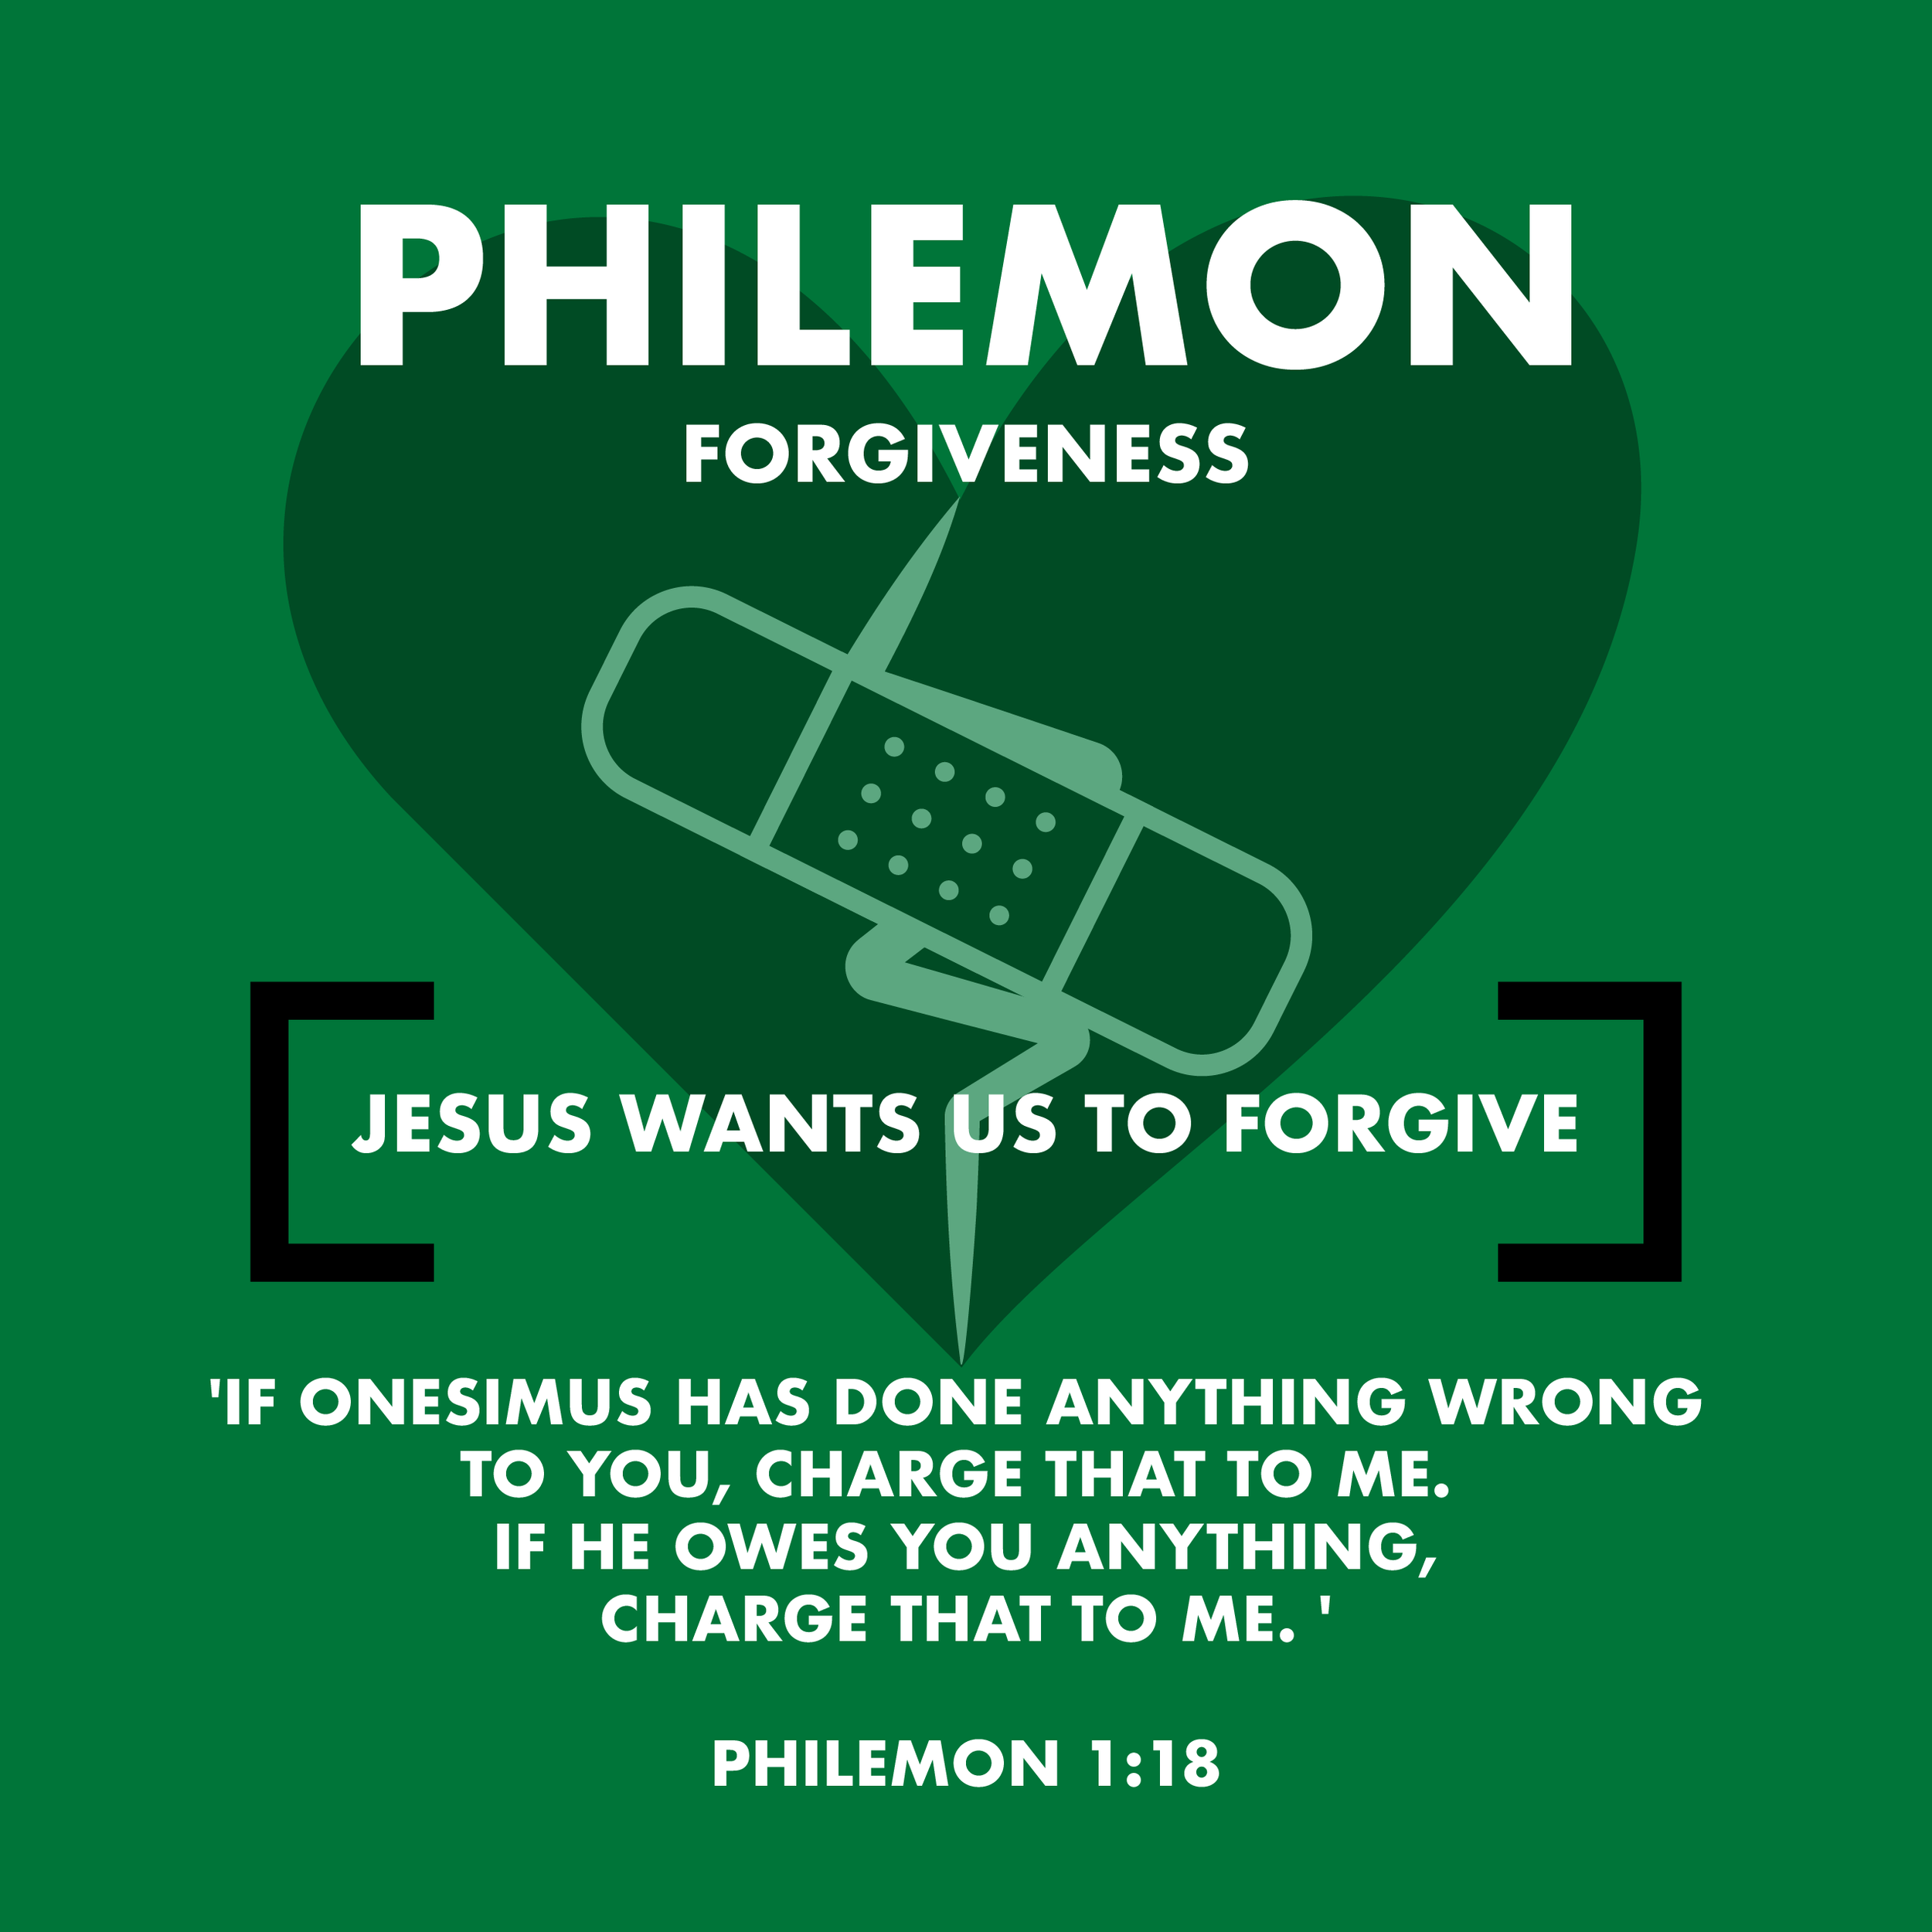 Books of the Bible_posters_55 Philemon.png